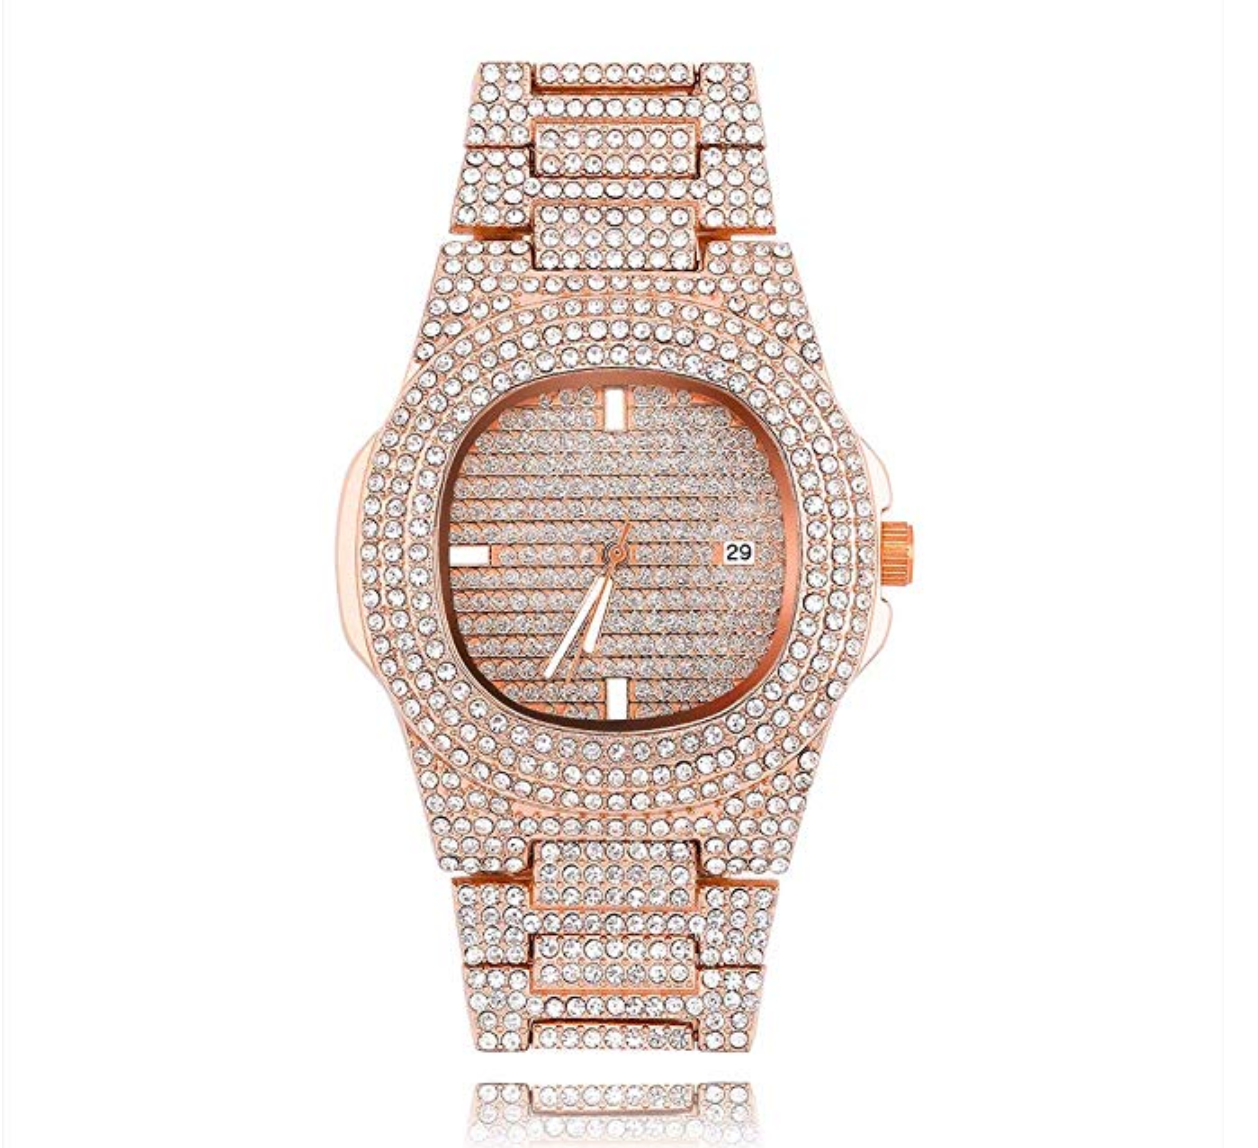 Gold Color Watch Simulated Diamond Watch Luxury Hip Hop Bling Bust Down Watch Iced Out Bling Watch